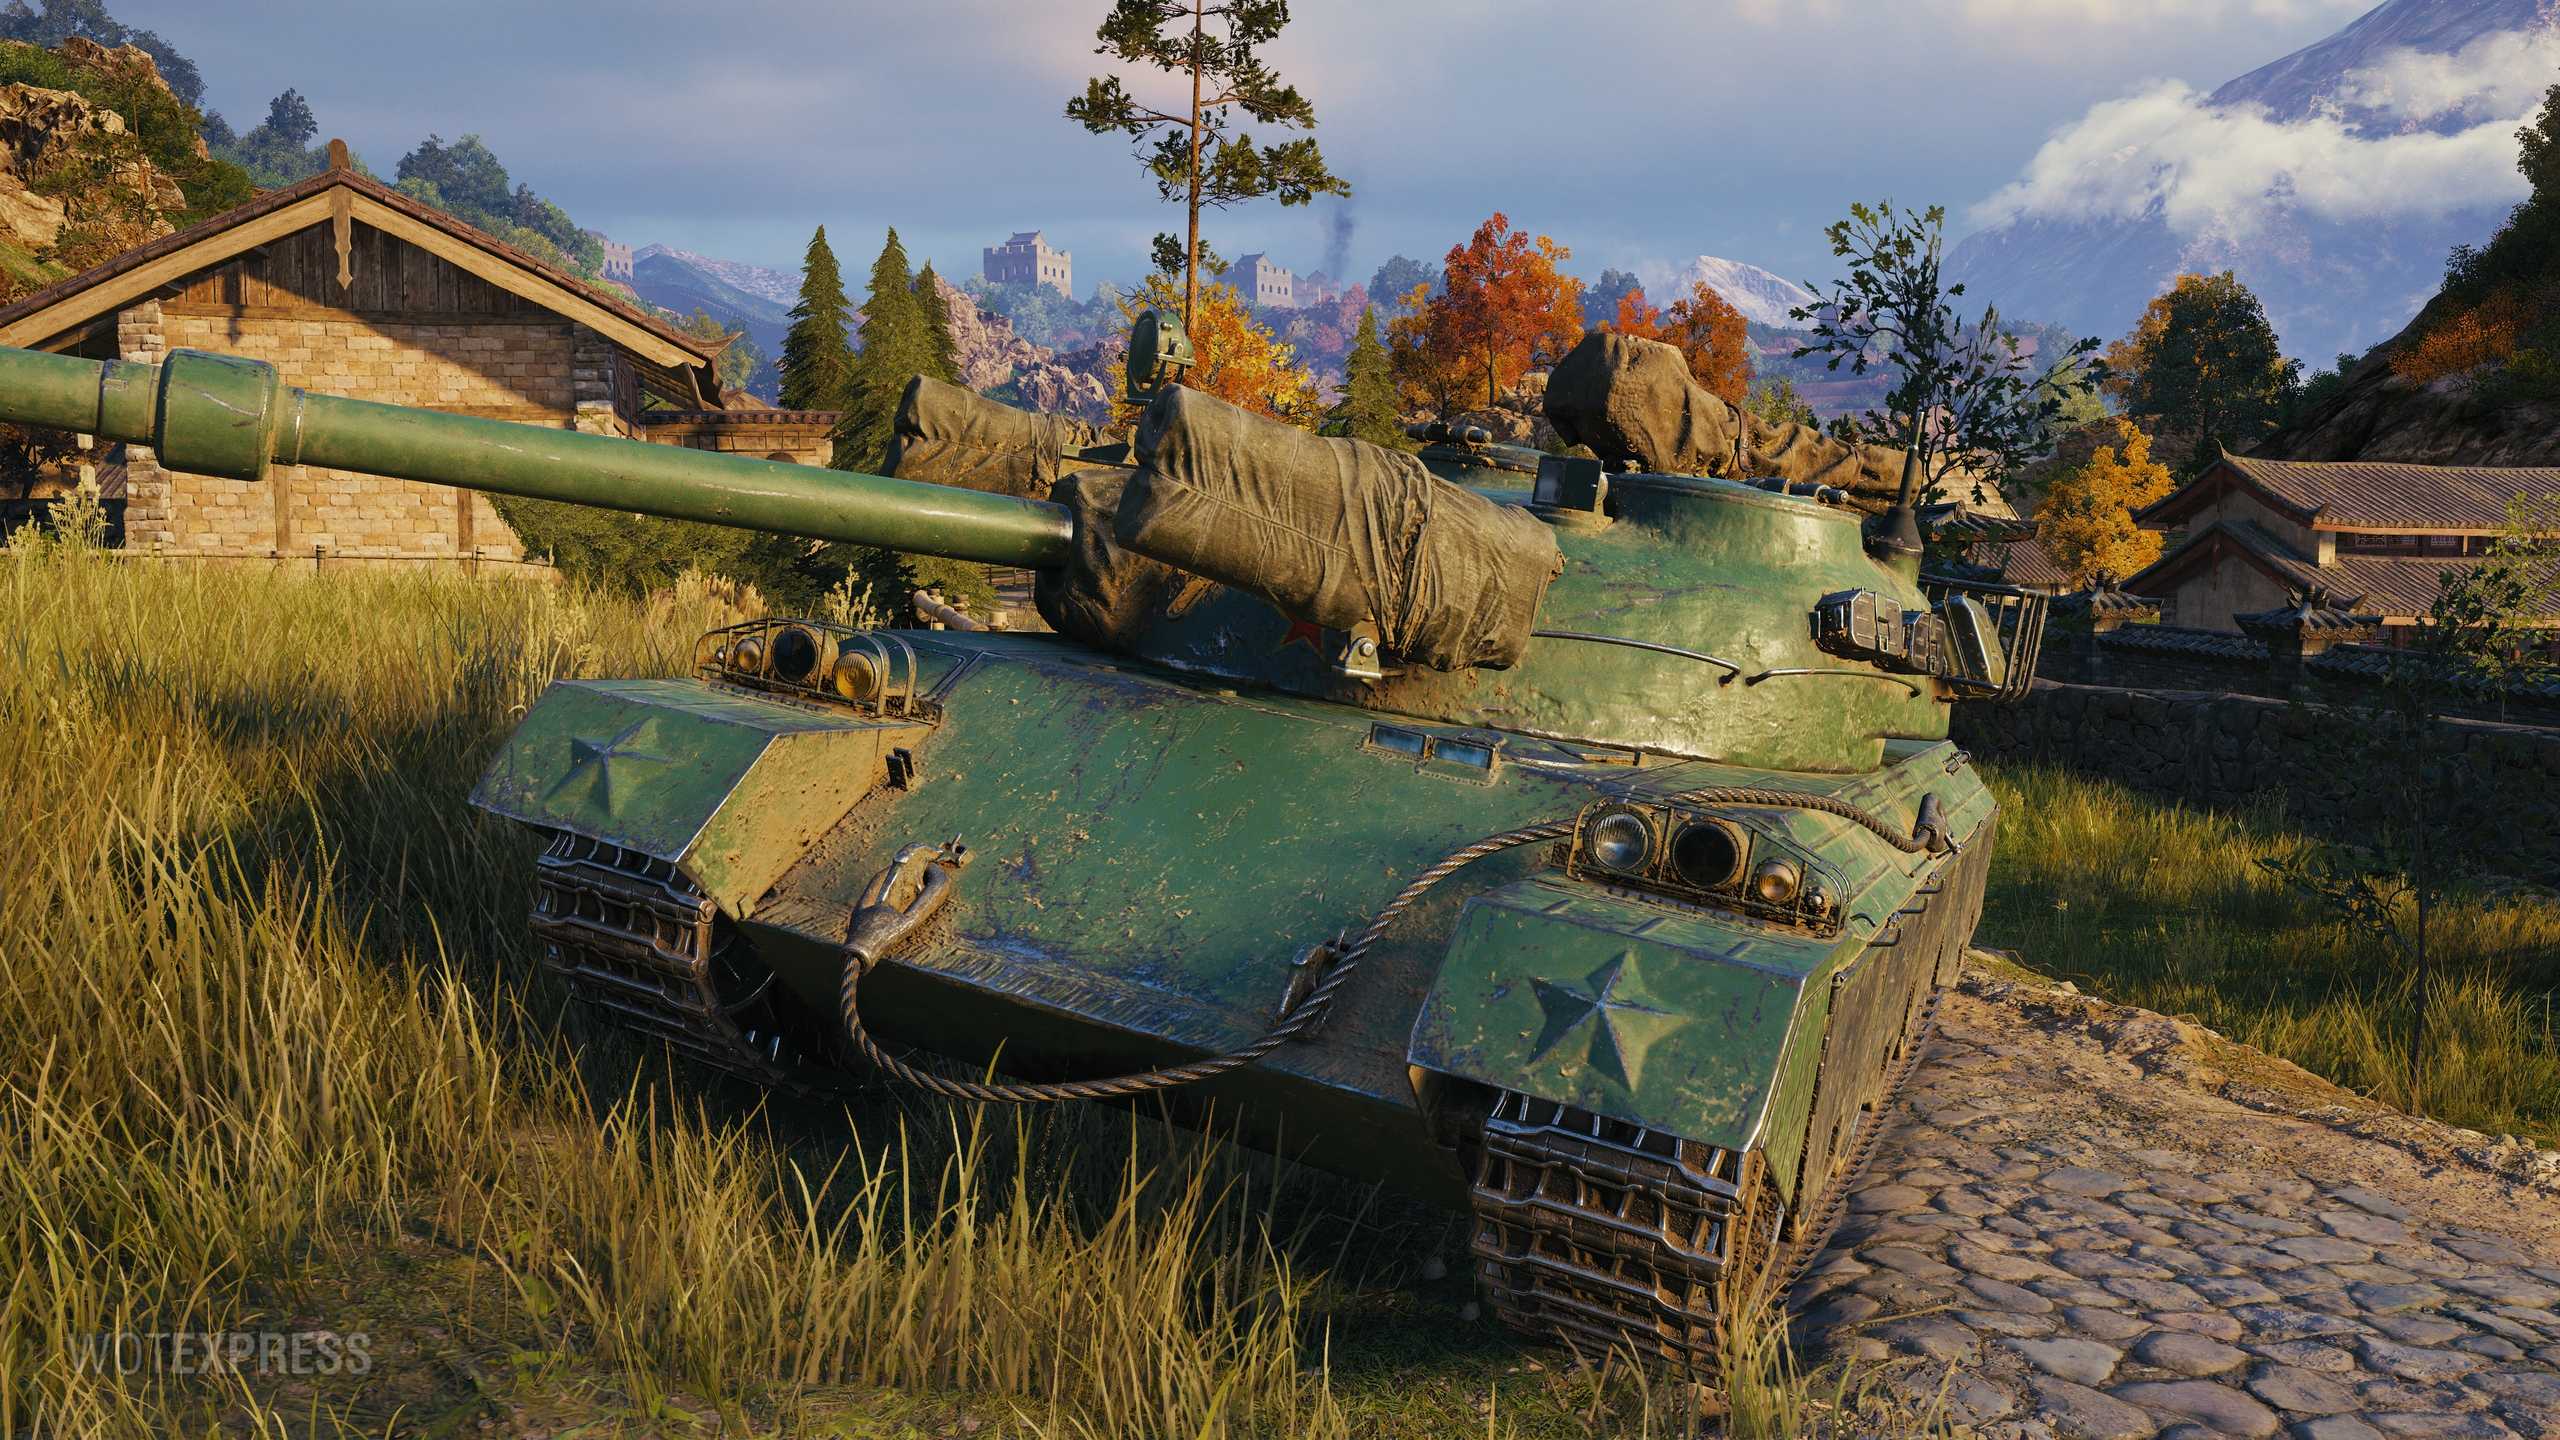 Permalink to World of Tanks 1.11 - 122 TM - in game pictures.